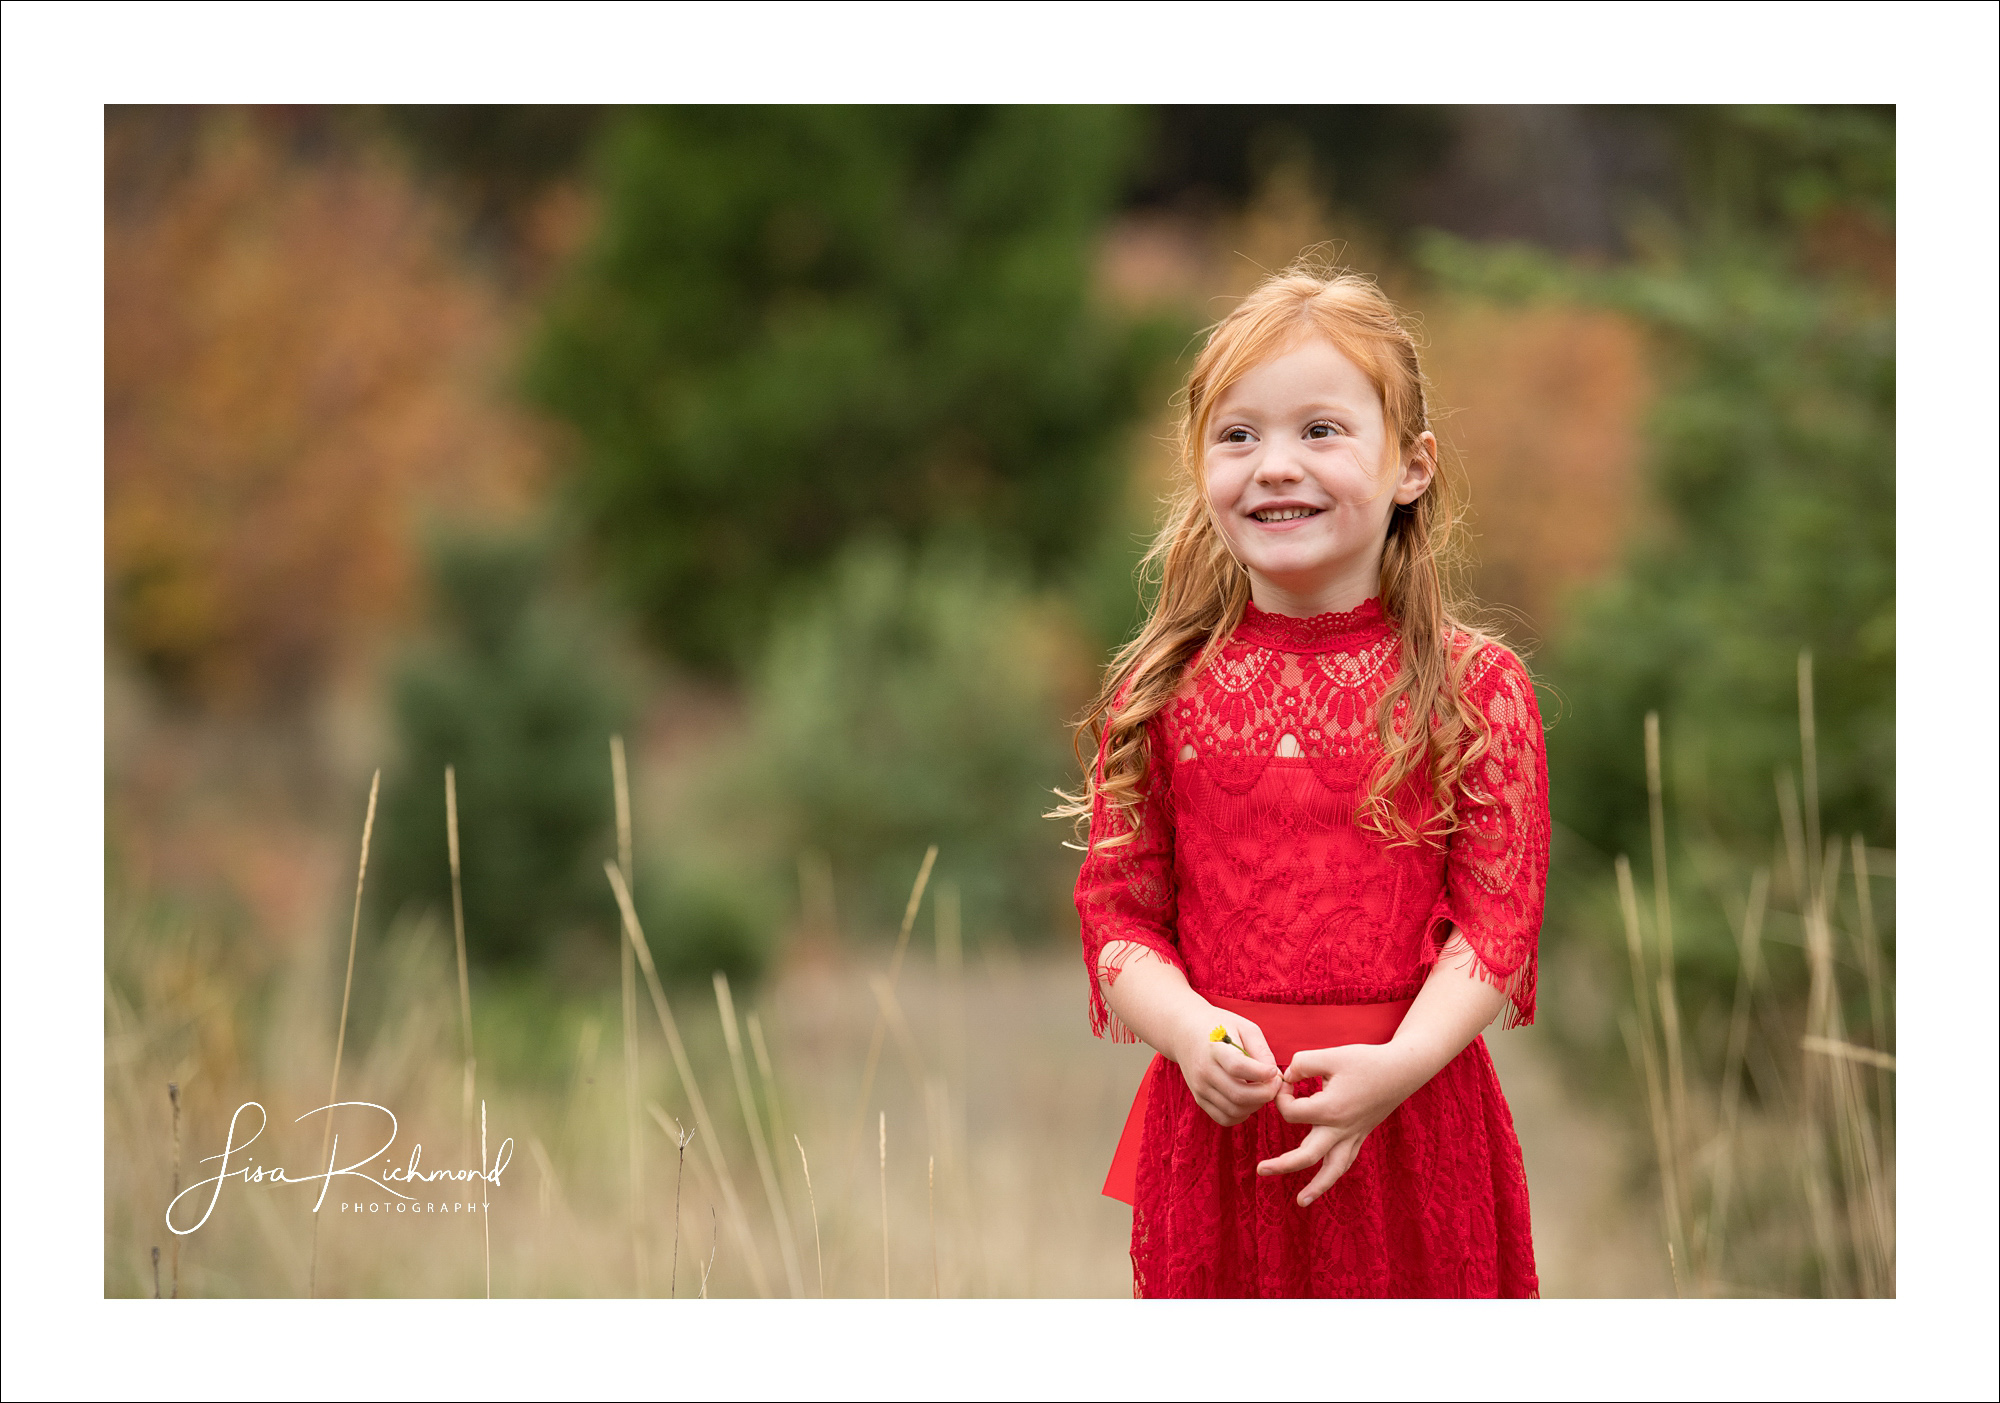 I can&#8217;t get enough of Miss Paisley&#8230;.